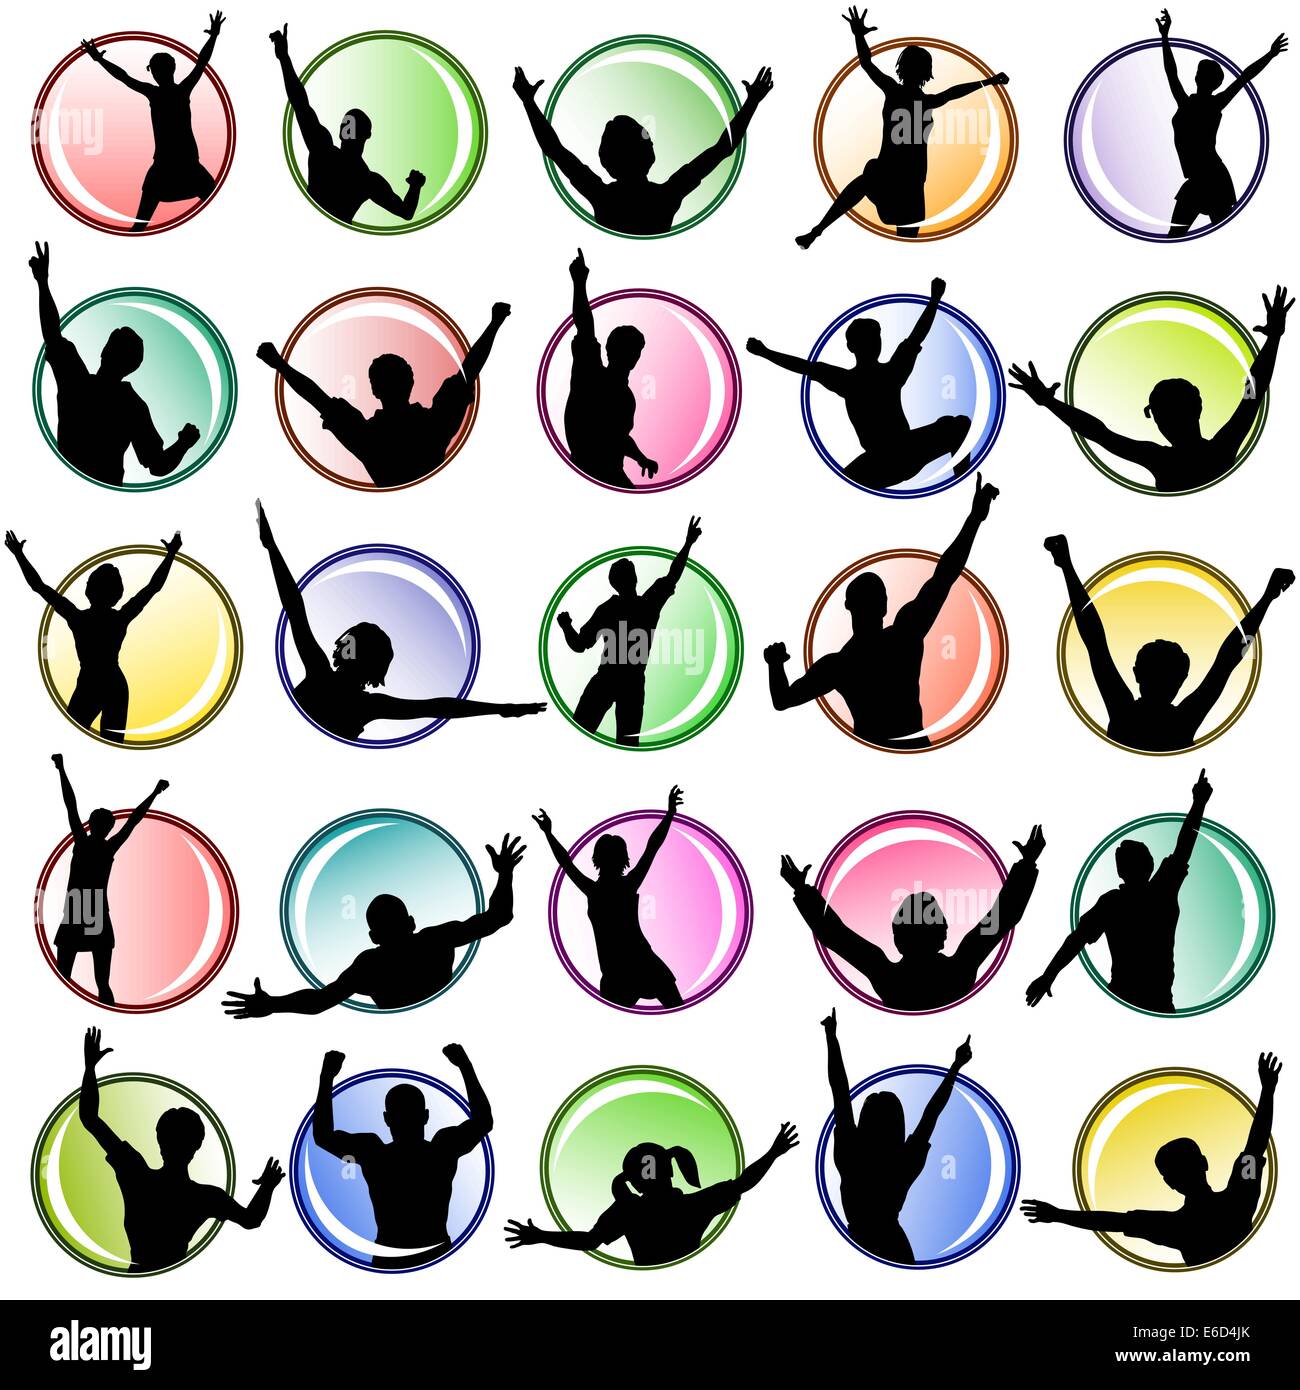 Set of editable vector buttons with people silhouettes Stock Vector